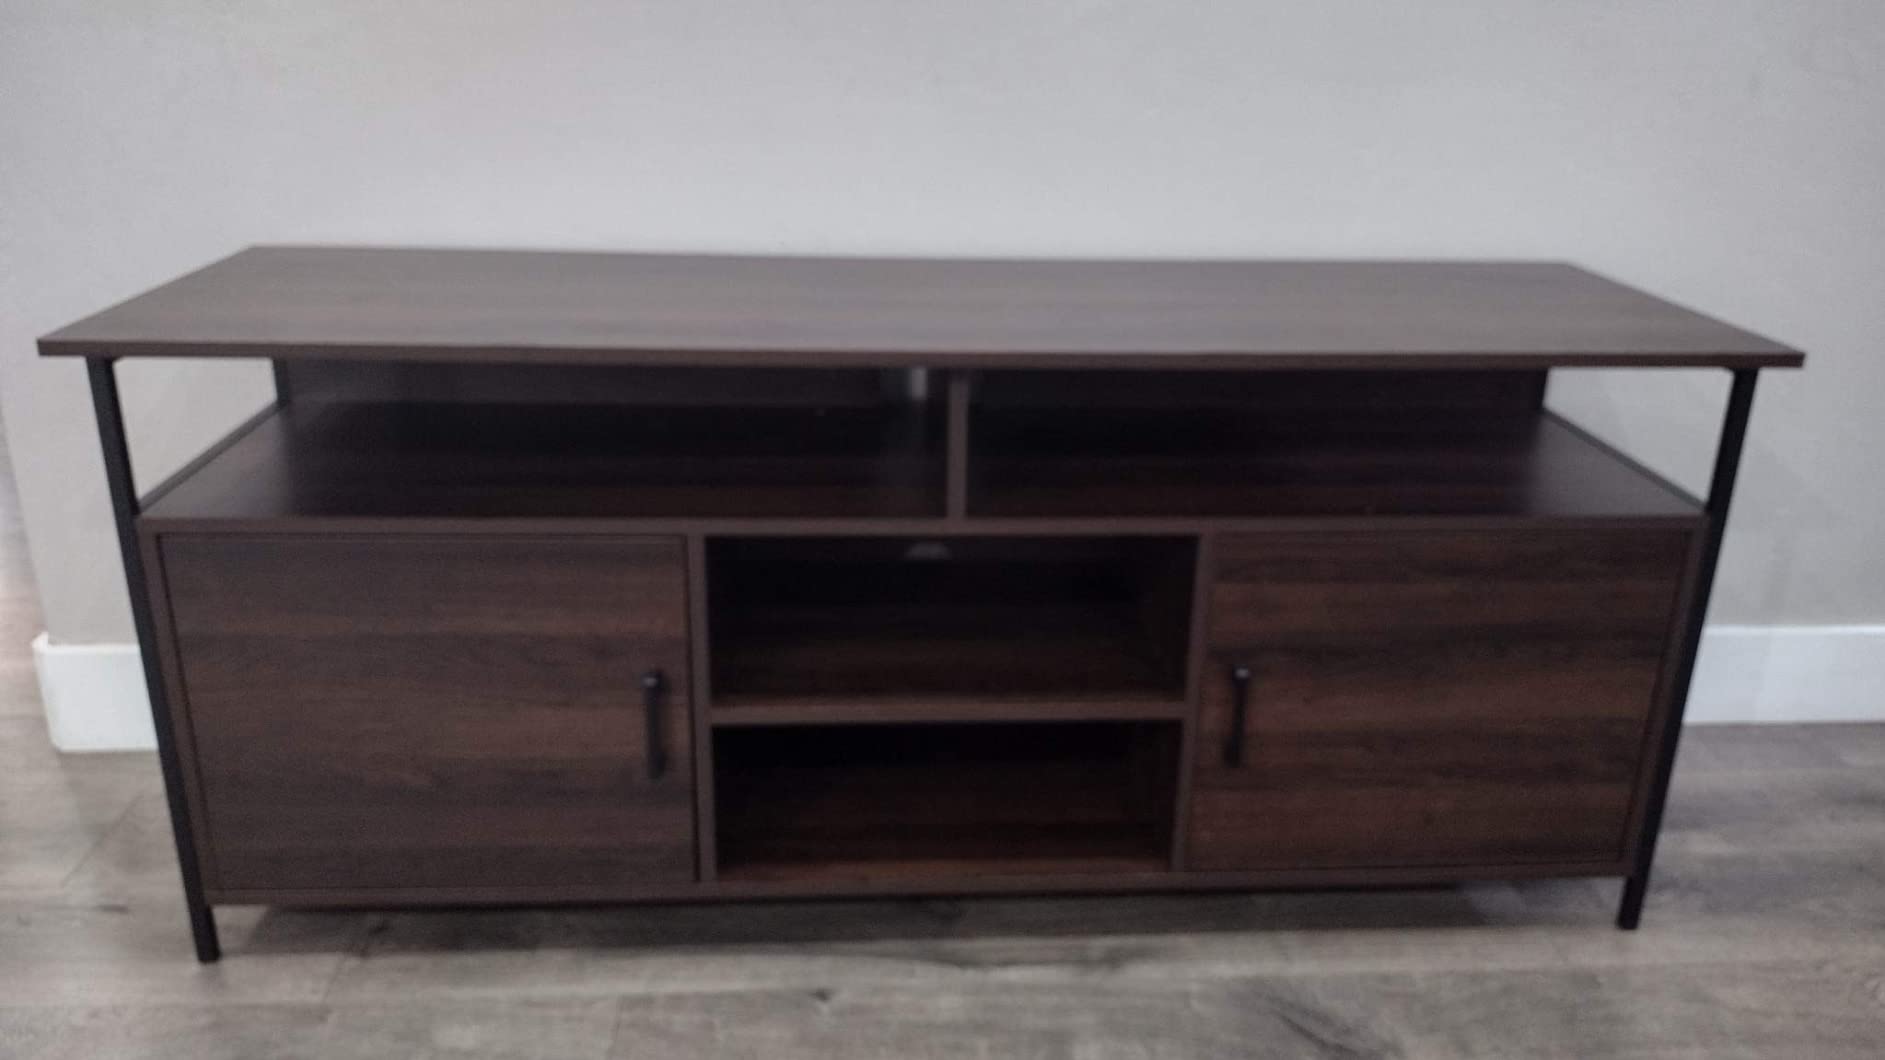 Lovely tv stand with plenty of room